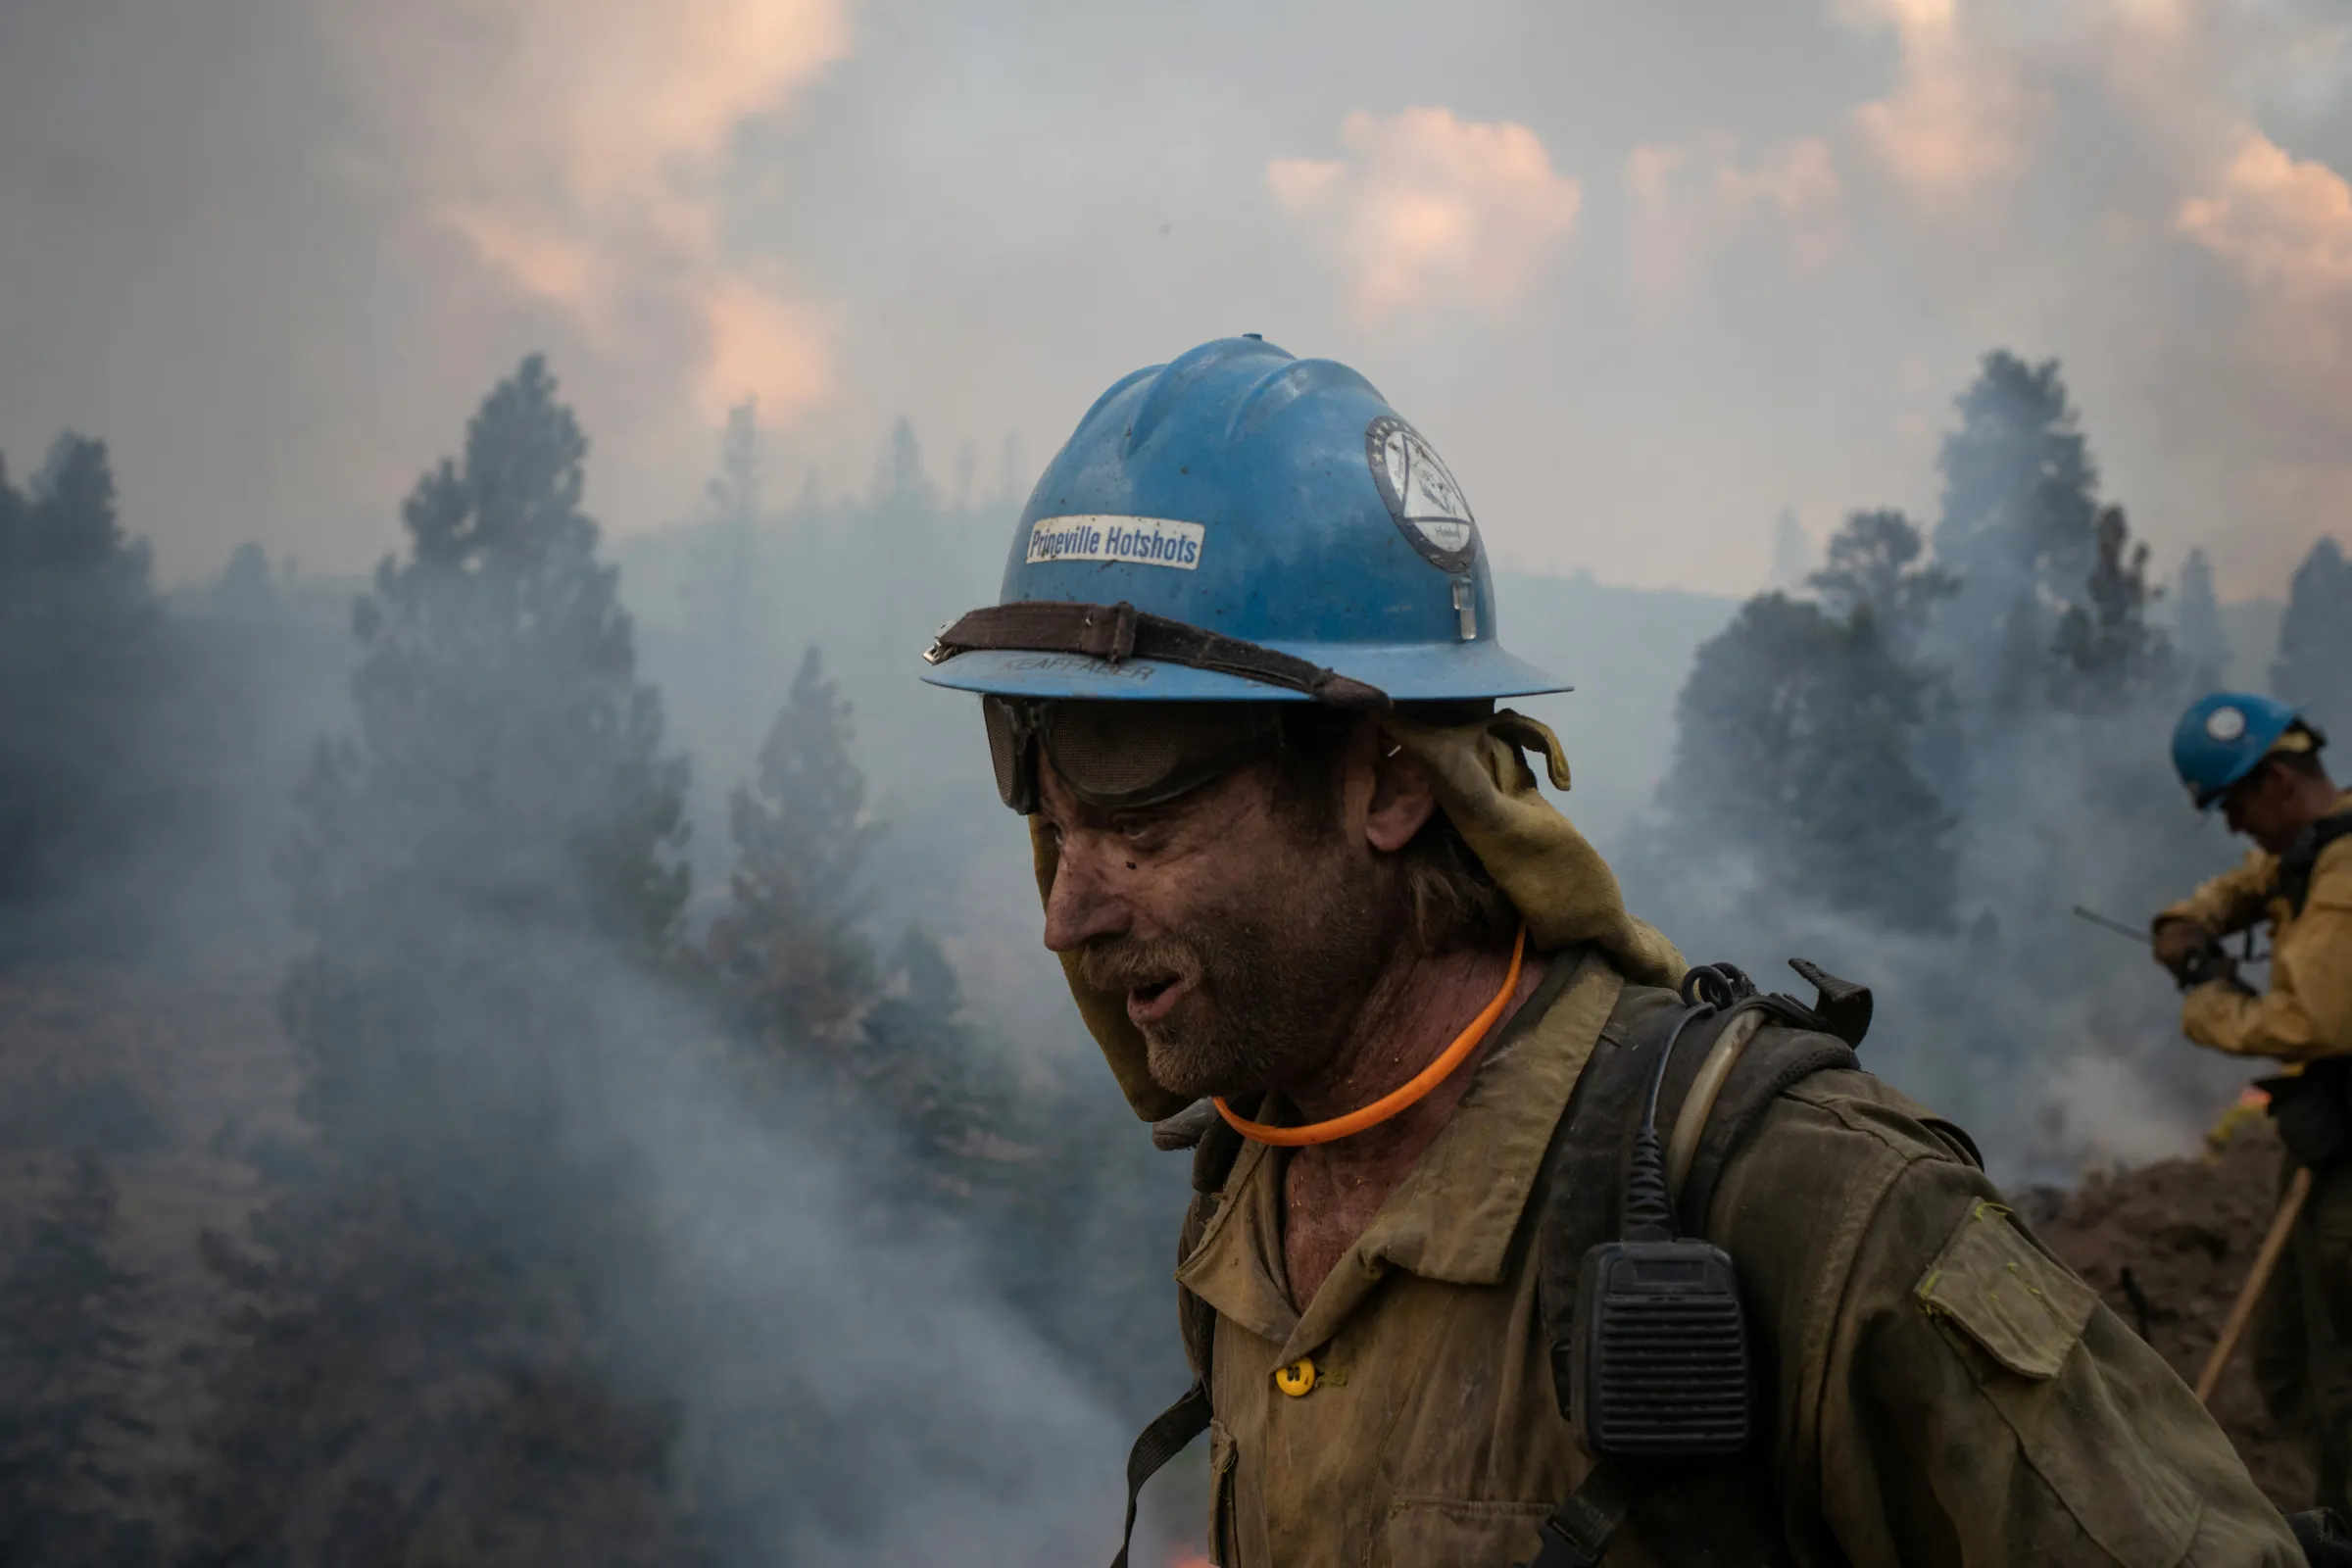 Kirk McDusky, a member of the Prineville Hotshot Crew, walks past smoke rising from the Brattain Fire in the Fremont National Forest in Paisley, Oregon, U.S., September 18, 2020